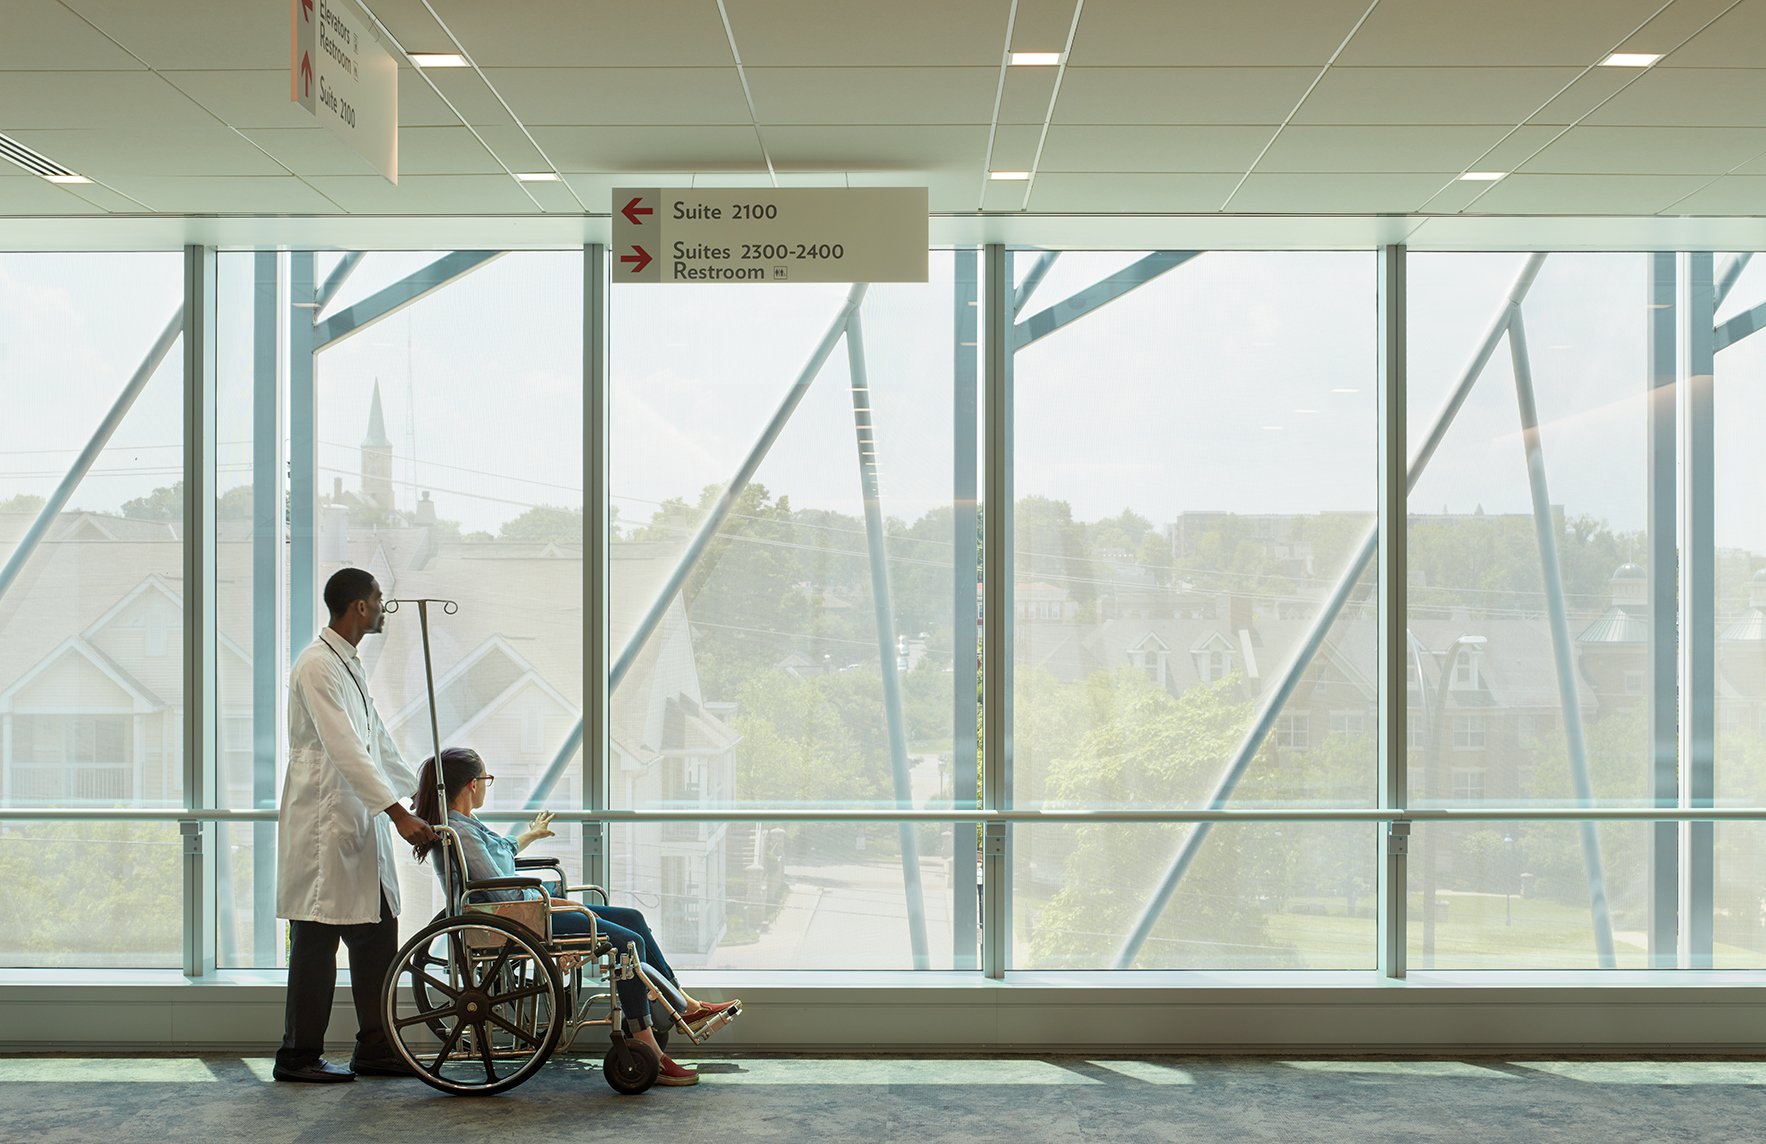  Guiding patients, their families, and care providers to where they need to go in a streamlined fashion 